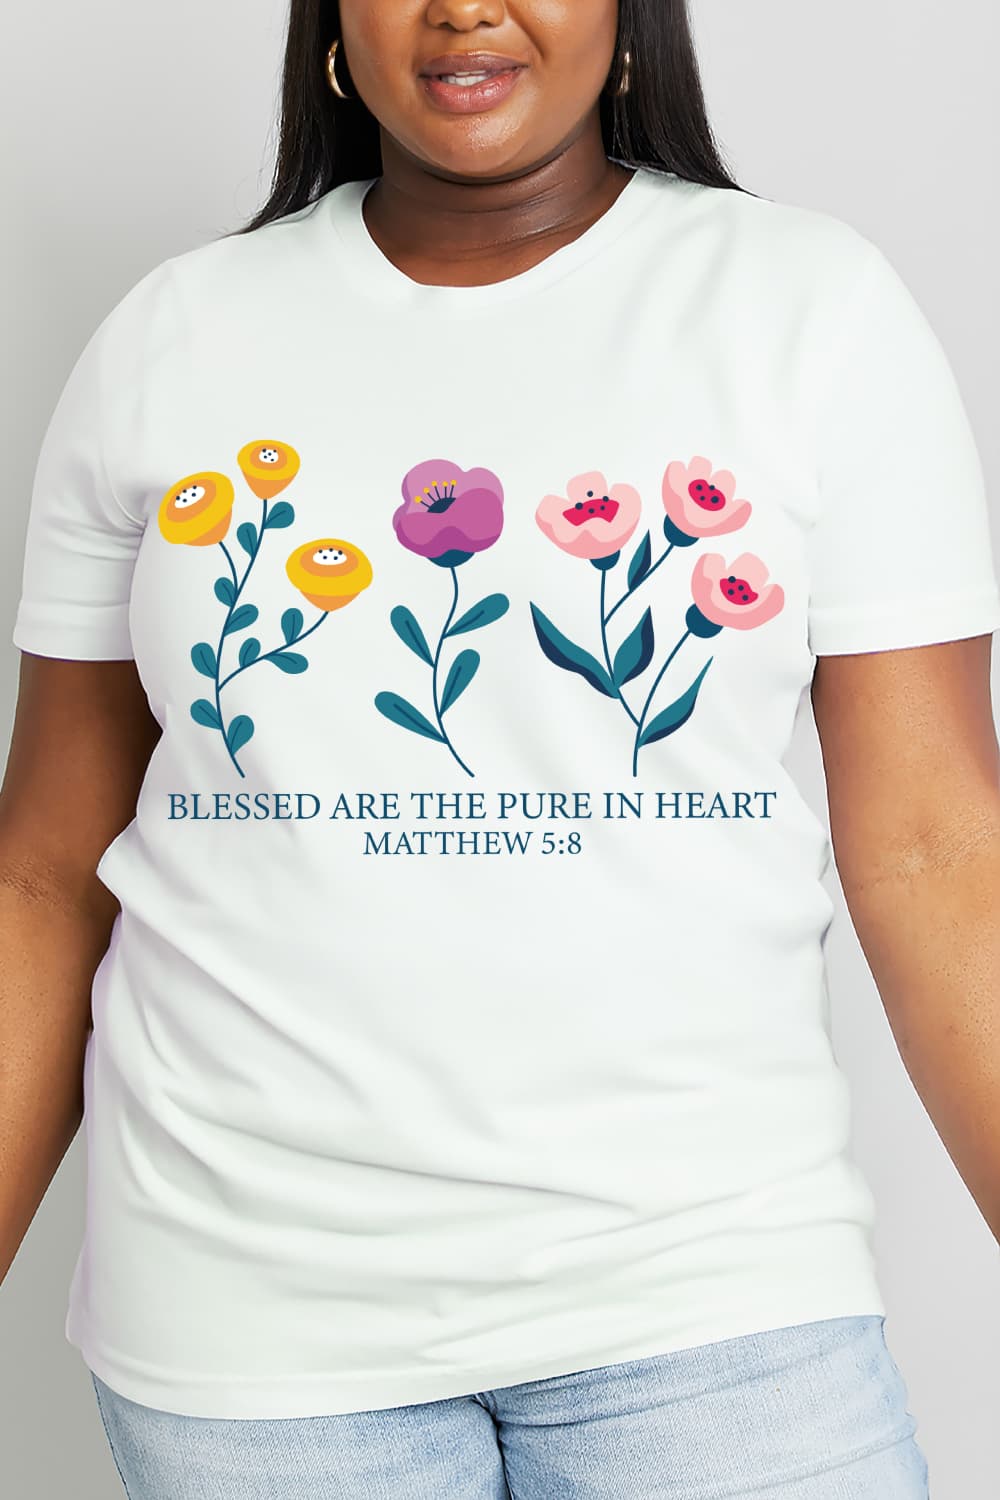 Full Size Blessed Are the Pure in Heart Matthew 5:8 Graphic Cotton Tee